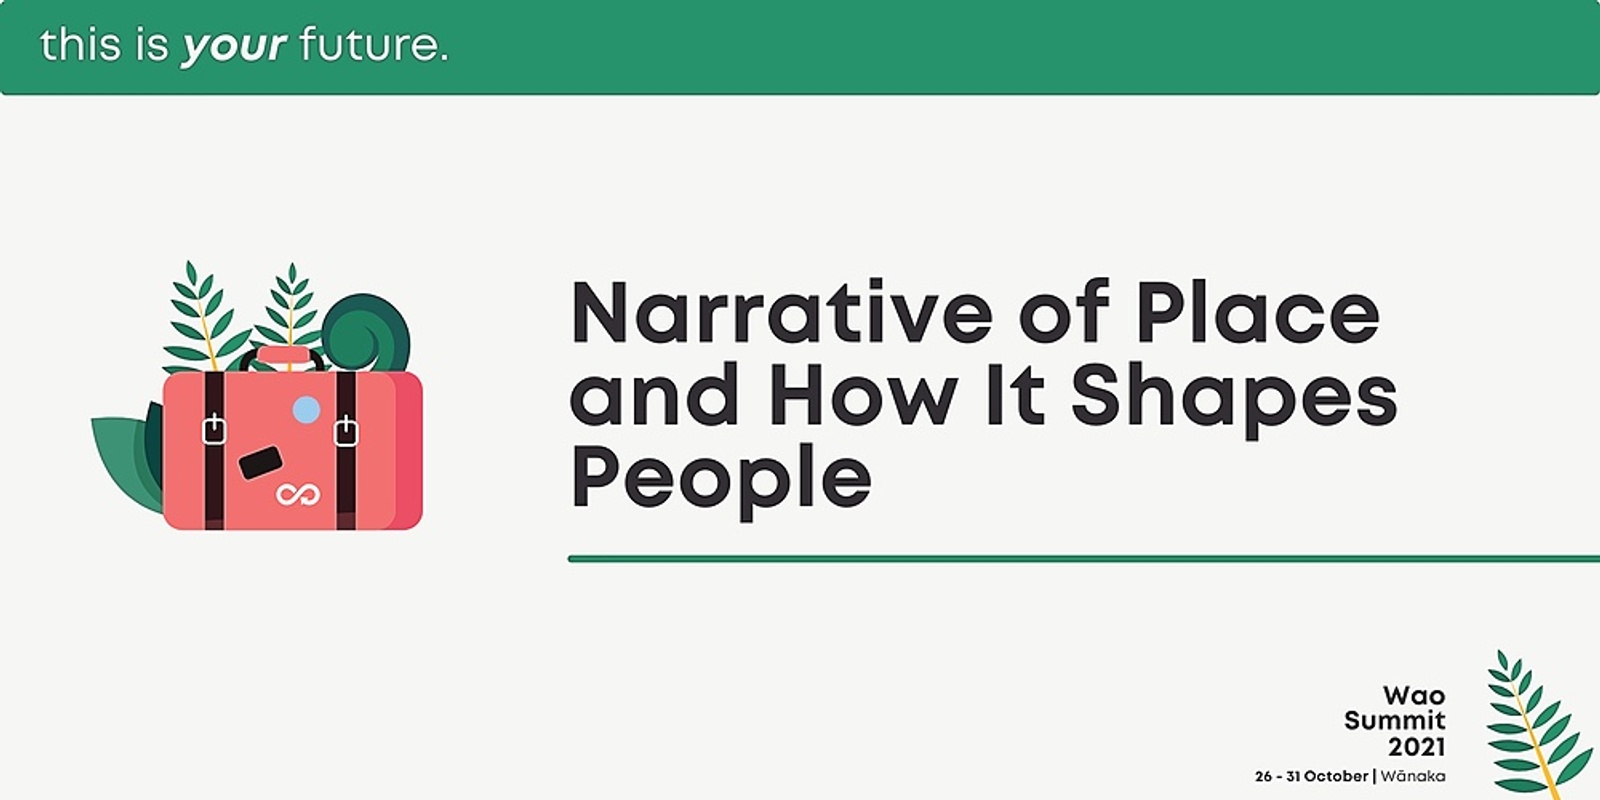 Narrative of Place and How It Shapes People